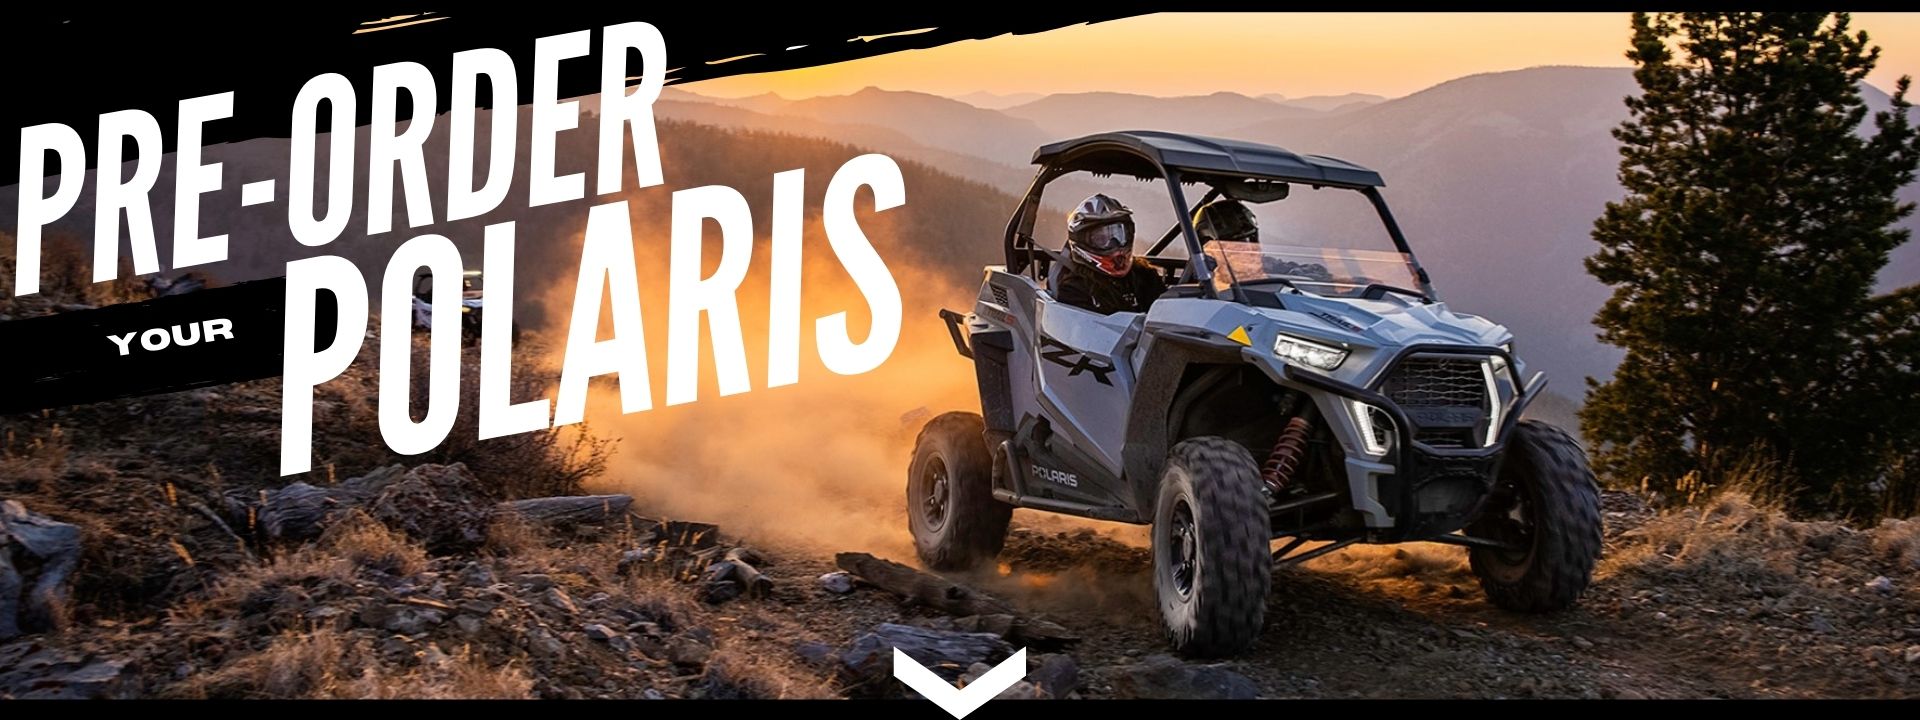 Pre-order your new Polaris ATV or Side-by-Side 	today!